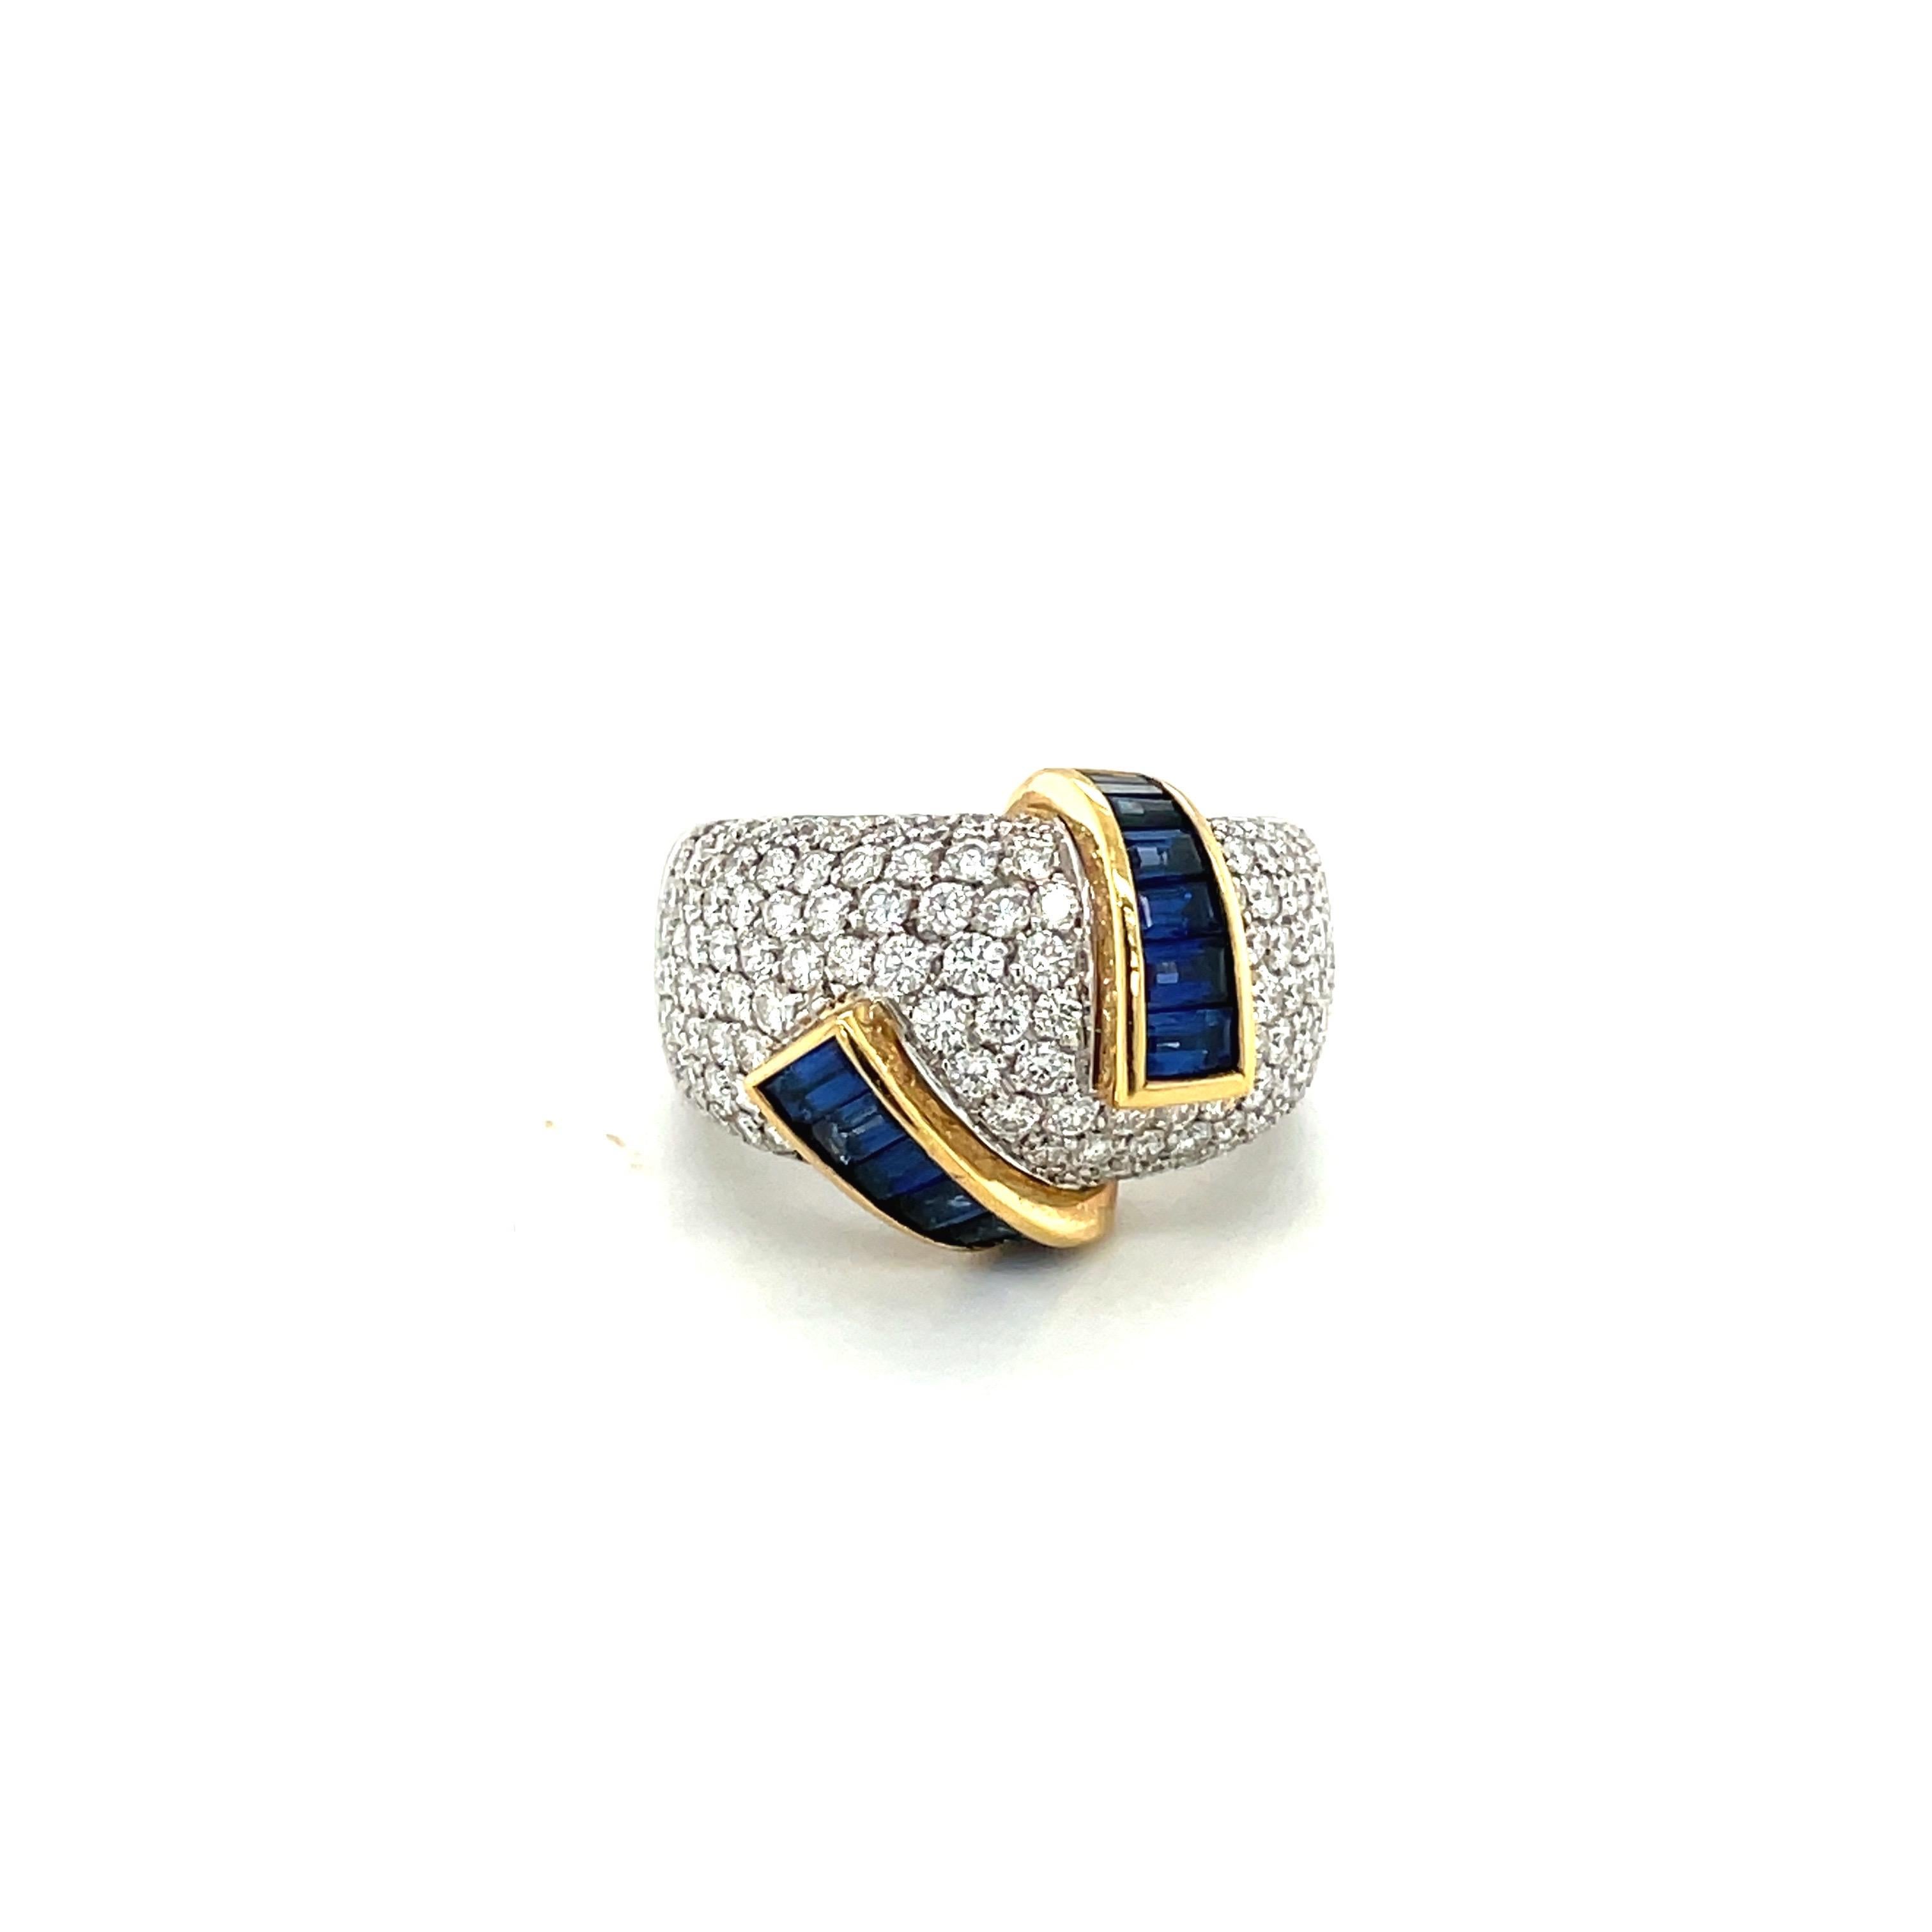 Alfiere & St. John 18KT Gold, Diamond 1.99 Carat and Blue Sapphire 2.15Ct. Ring In New Condition For Sale In New York, NY